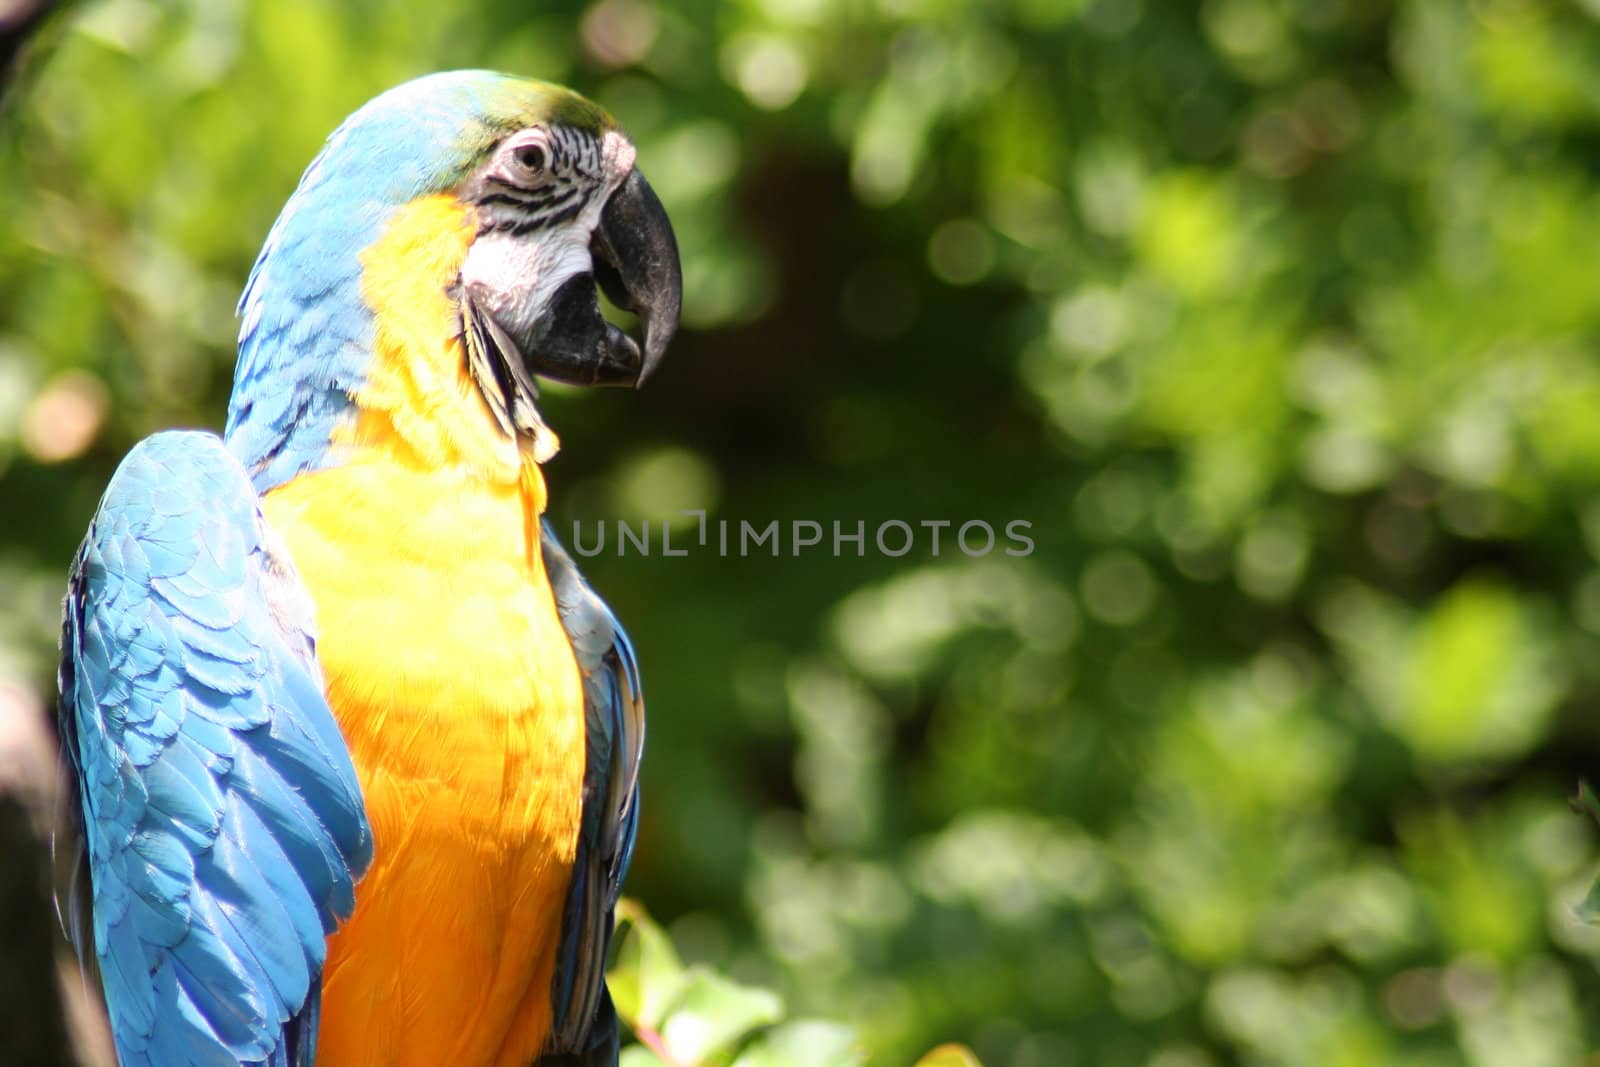 Colorful parrot with blue wings, yellow front, and other colors